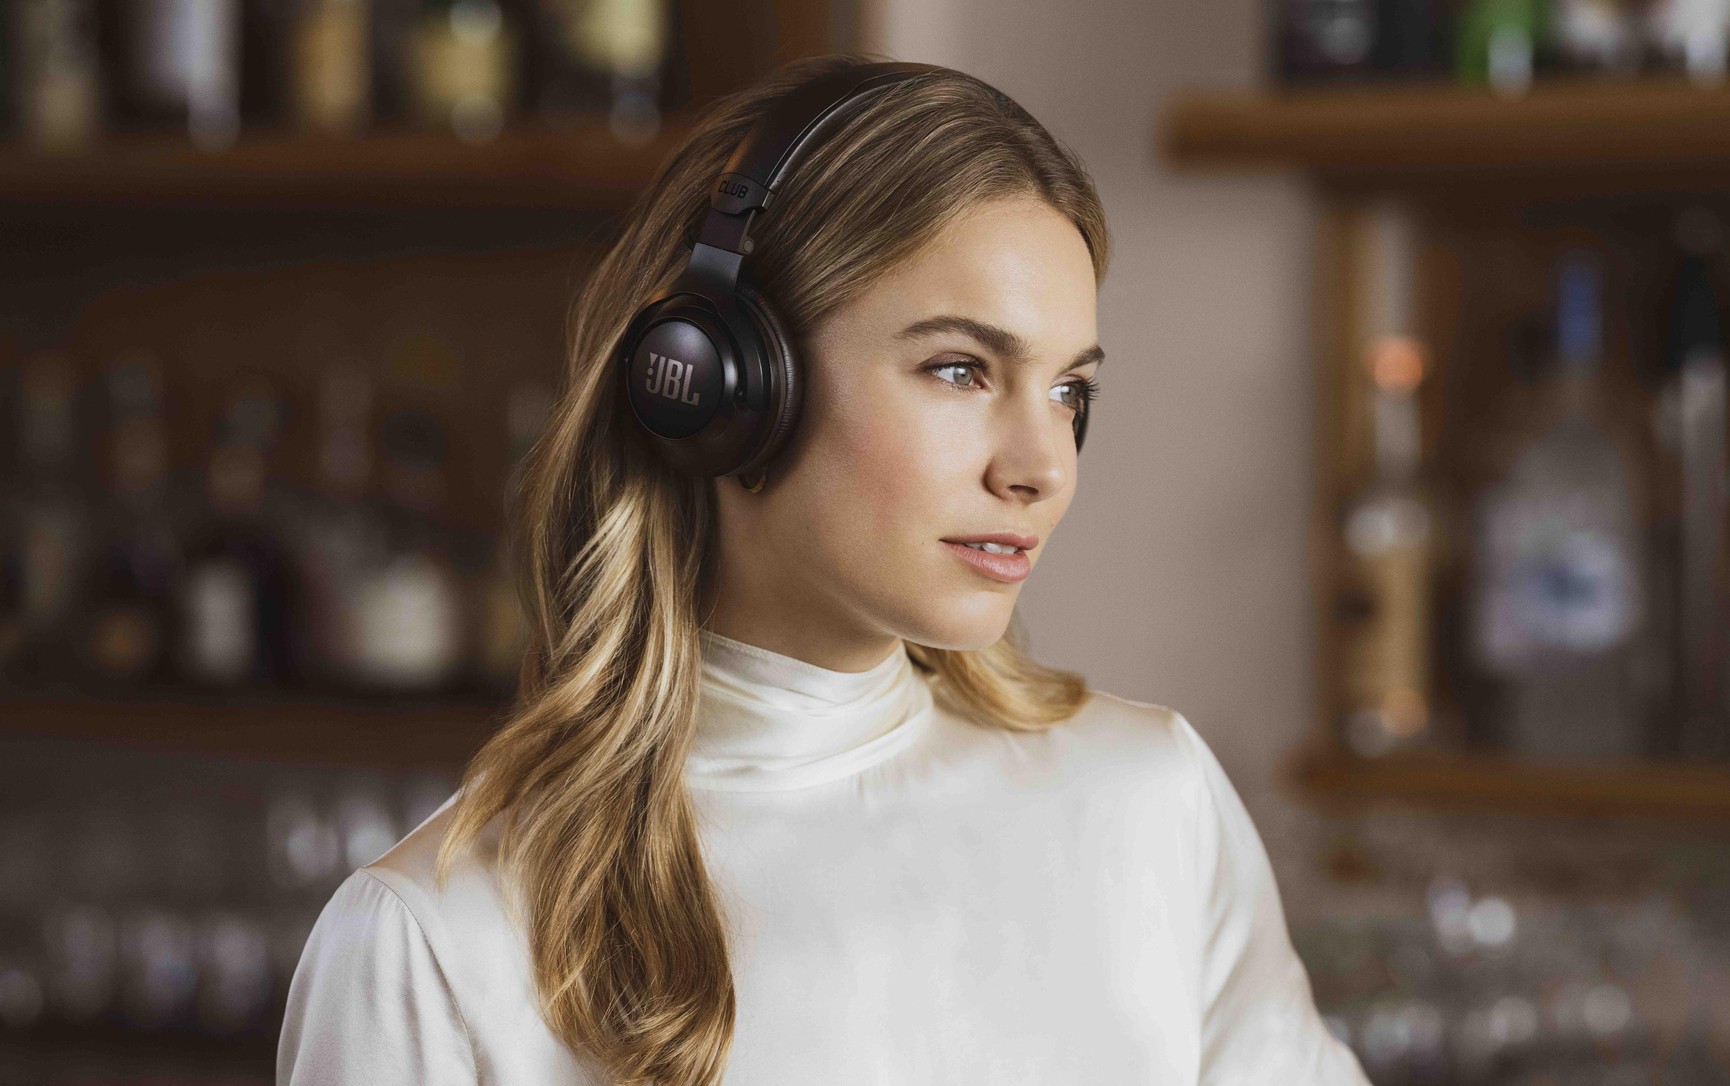 Do you know how to wear headphones properly?